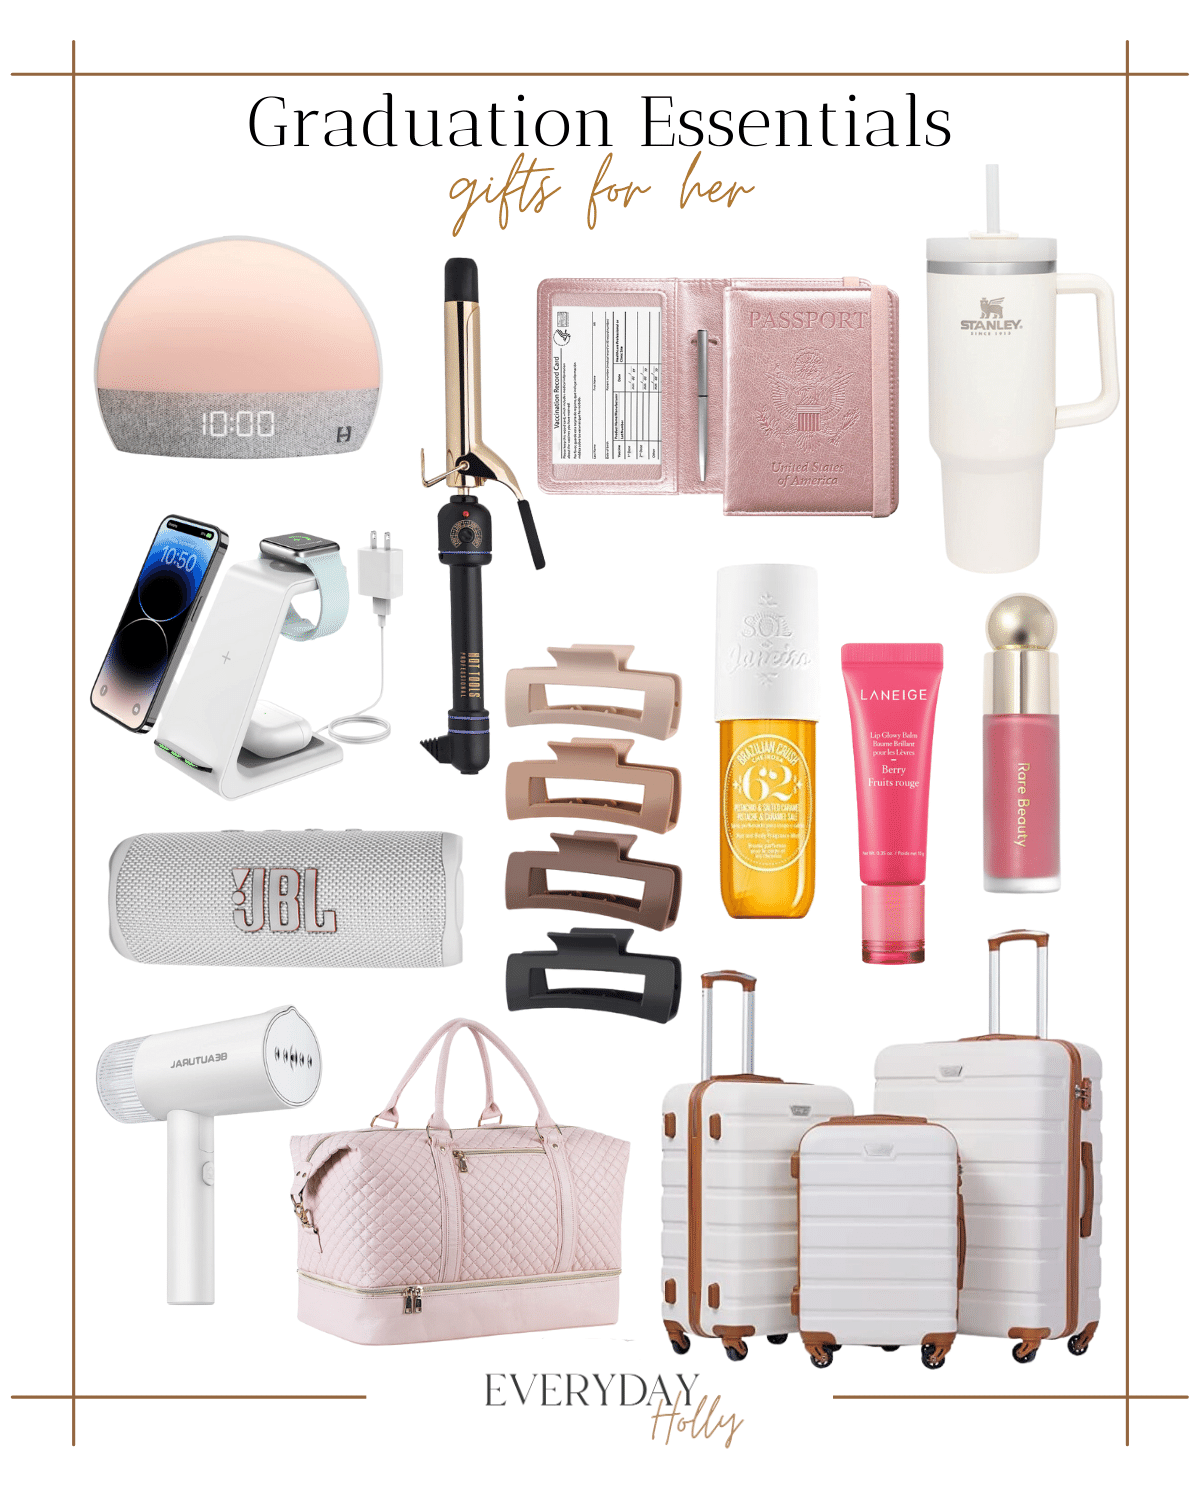 graduation essentials, gifts for her, hatch alarm clock, curling iron, multi charger, passport cover, stanley cup, speaker, hair clips, body mist, lip balm, blush, portable steamer, duffel bag, luggage, graduation, graduates 